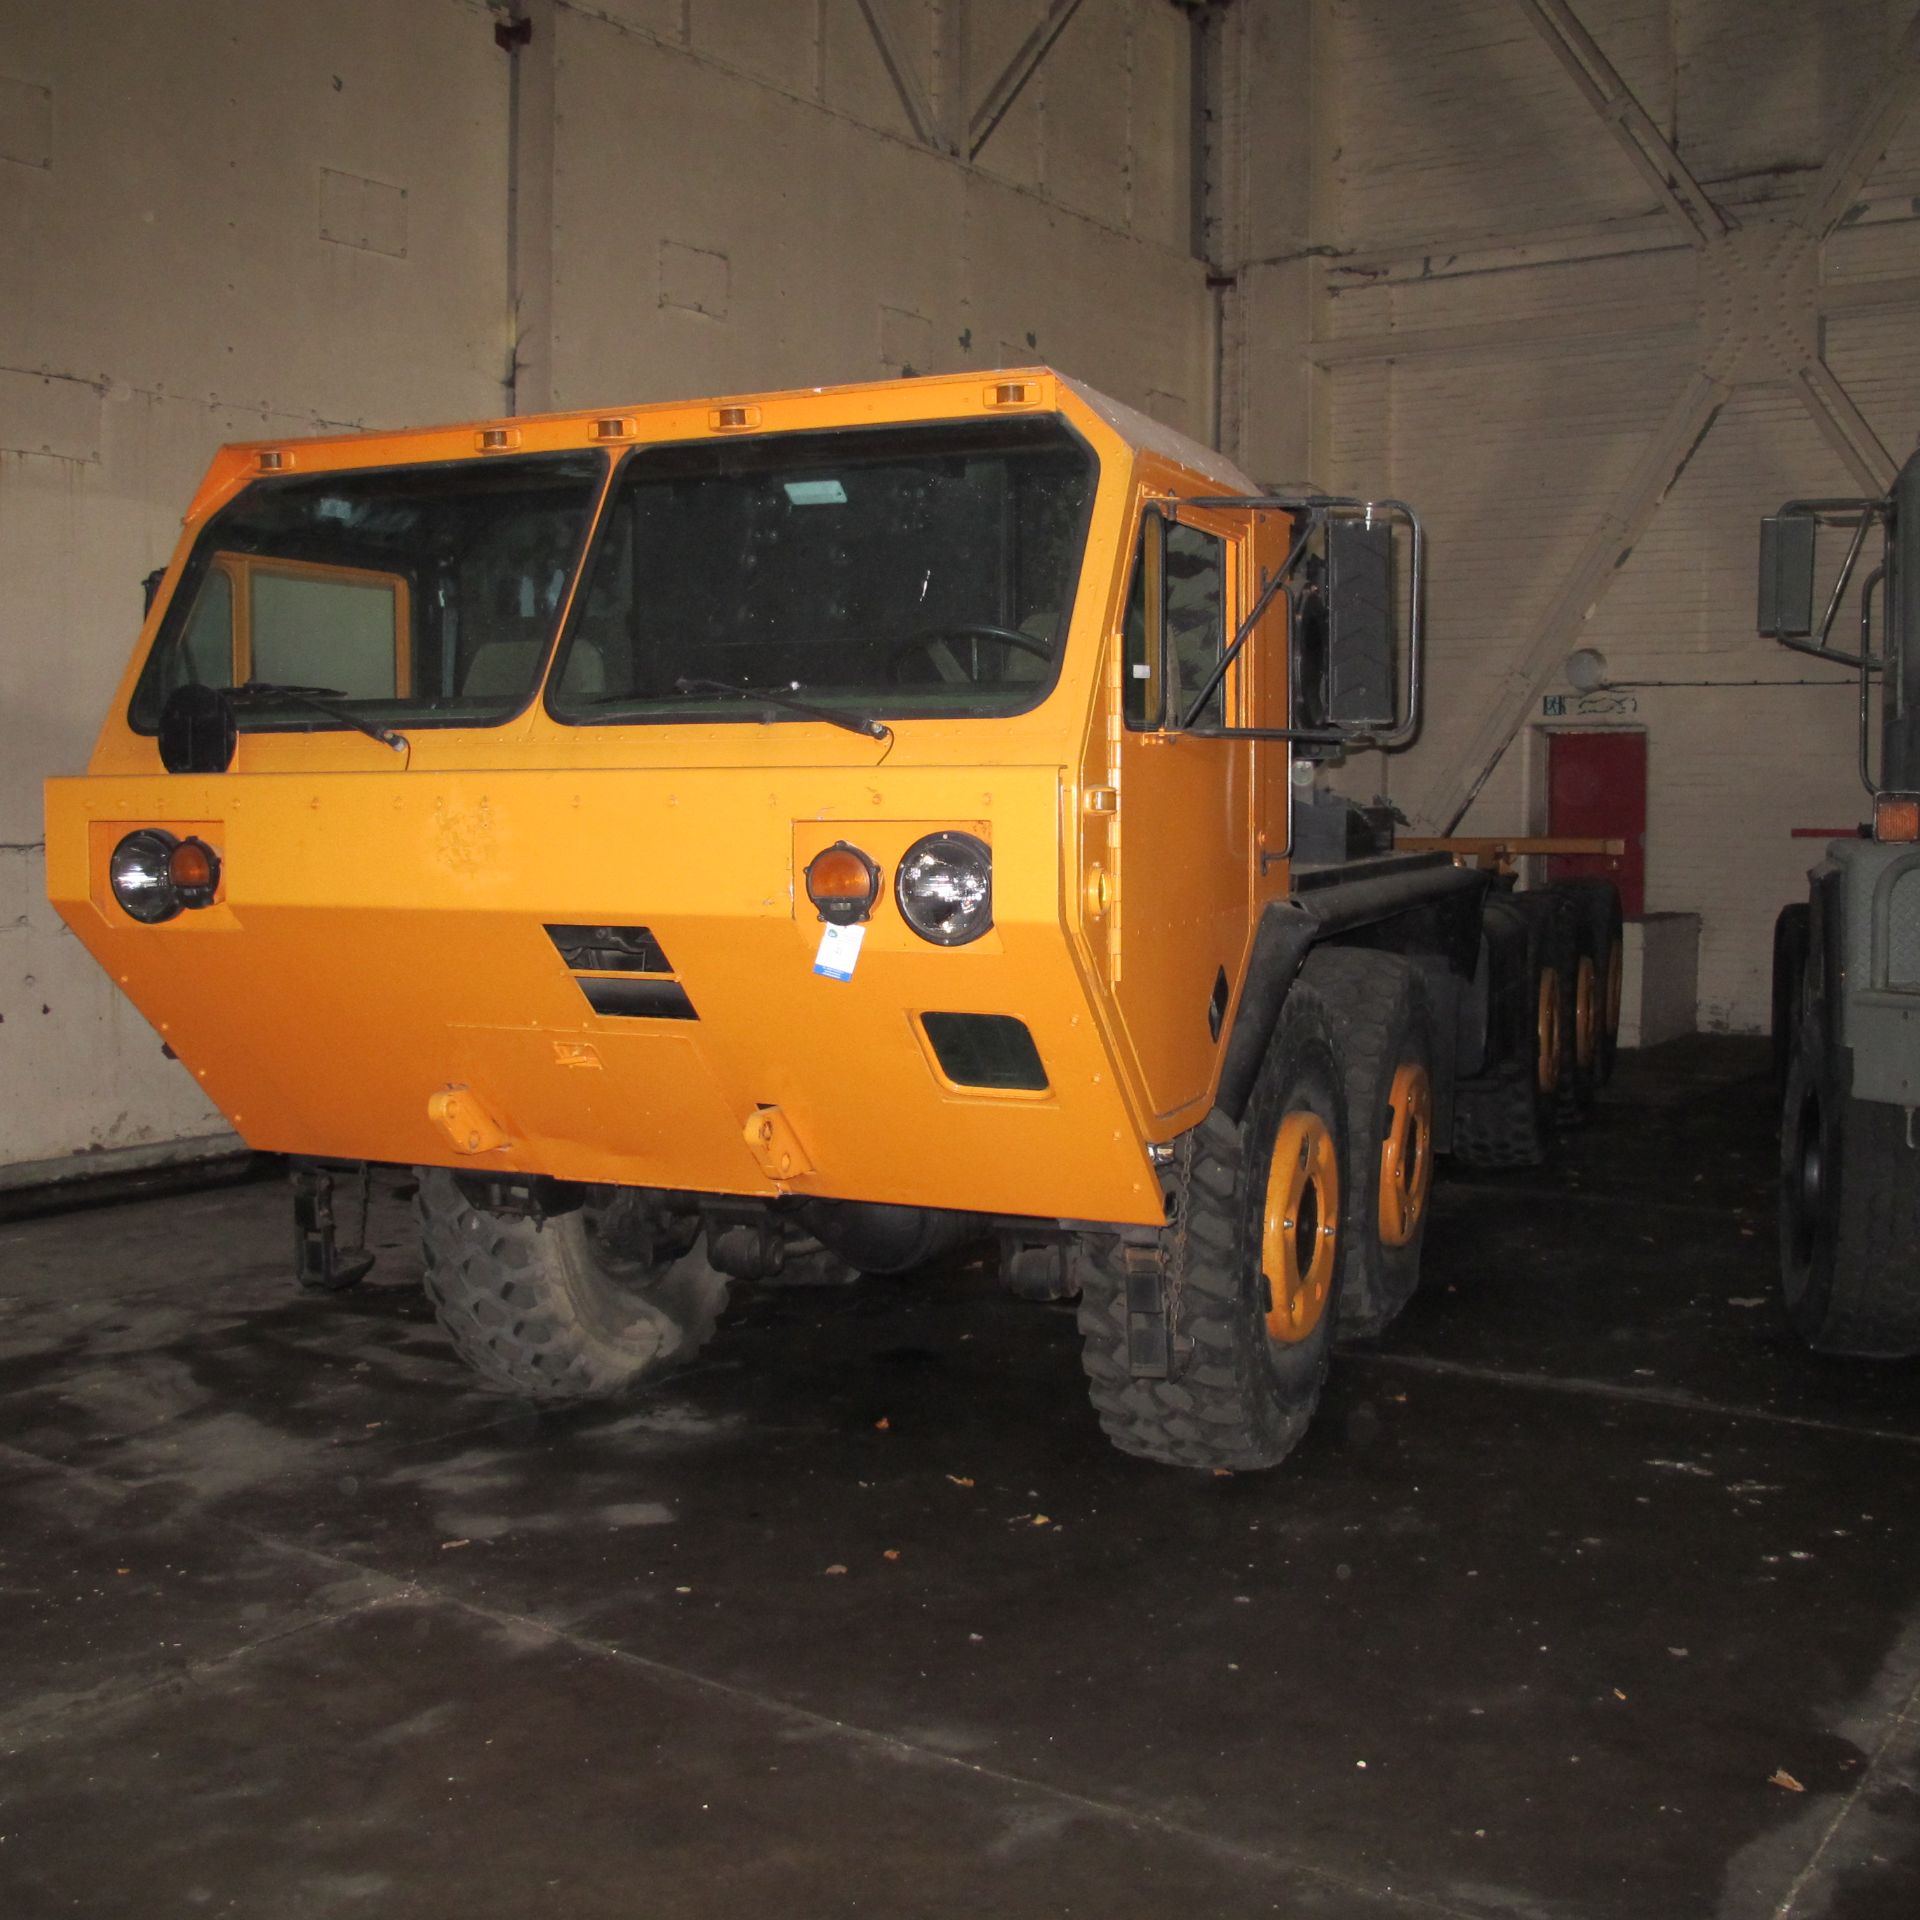 * Oshkosh 10x10 Heavy tactical Truck to LHD Specification. Powered by a Detroit 8v92TA 500hp